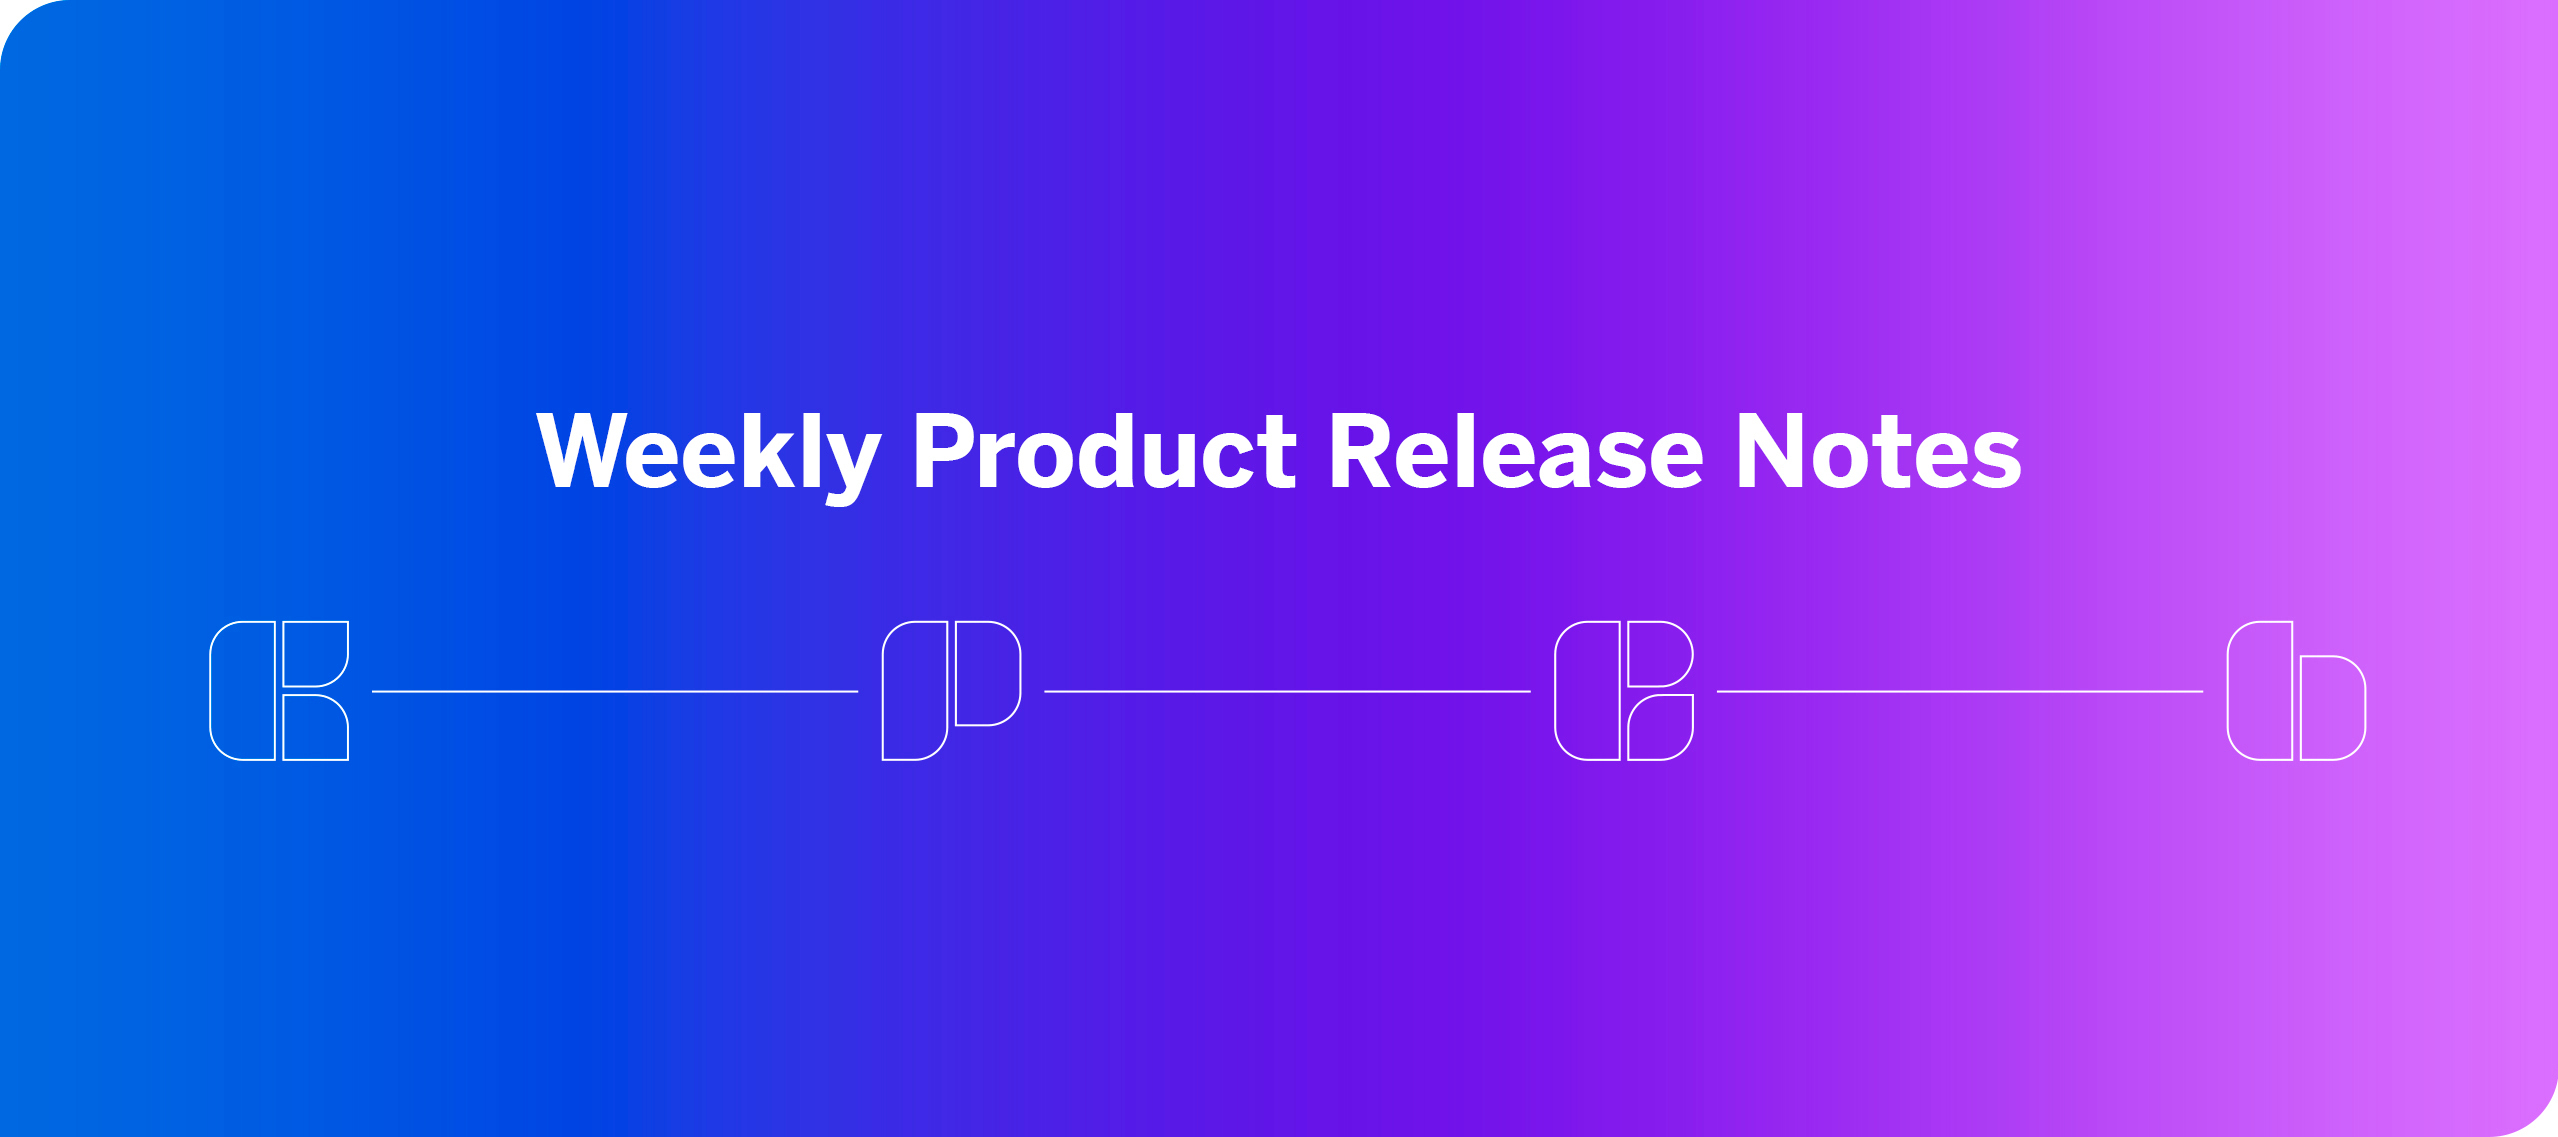 Weekly Product Release Notes - March 29, 2023